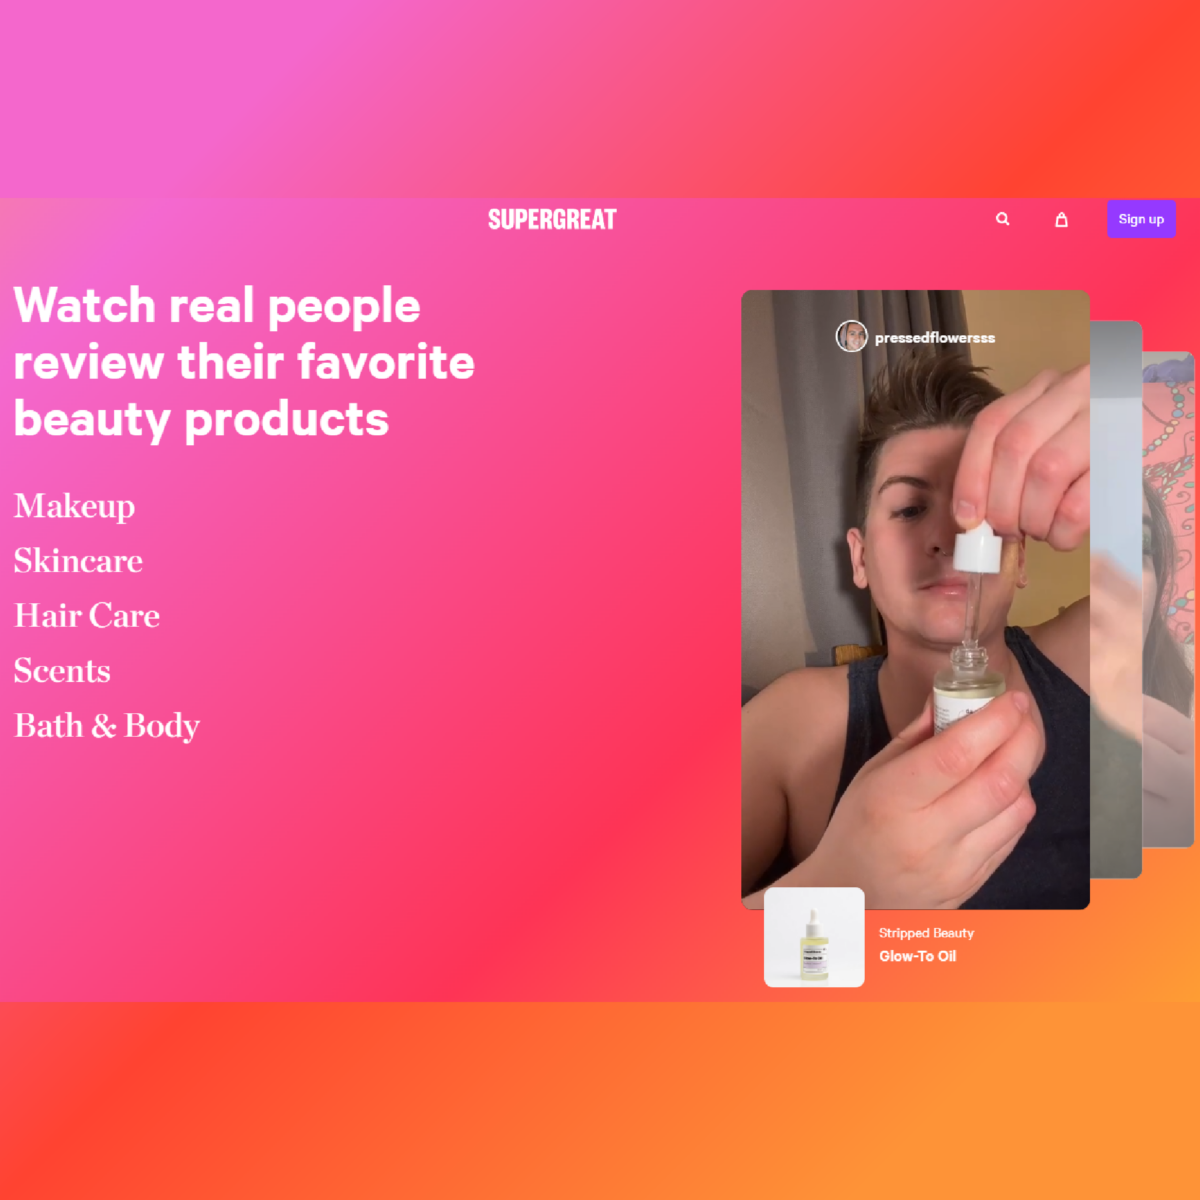 Supergreat App is a beauty community focused app